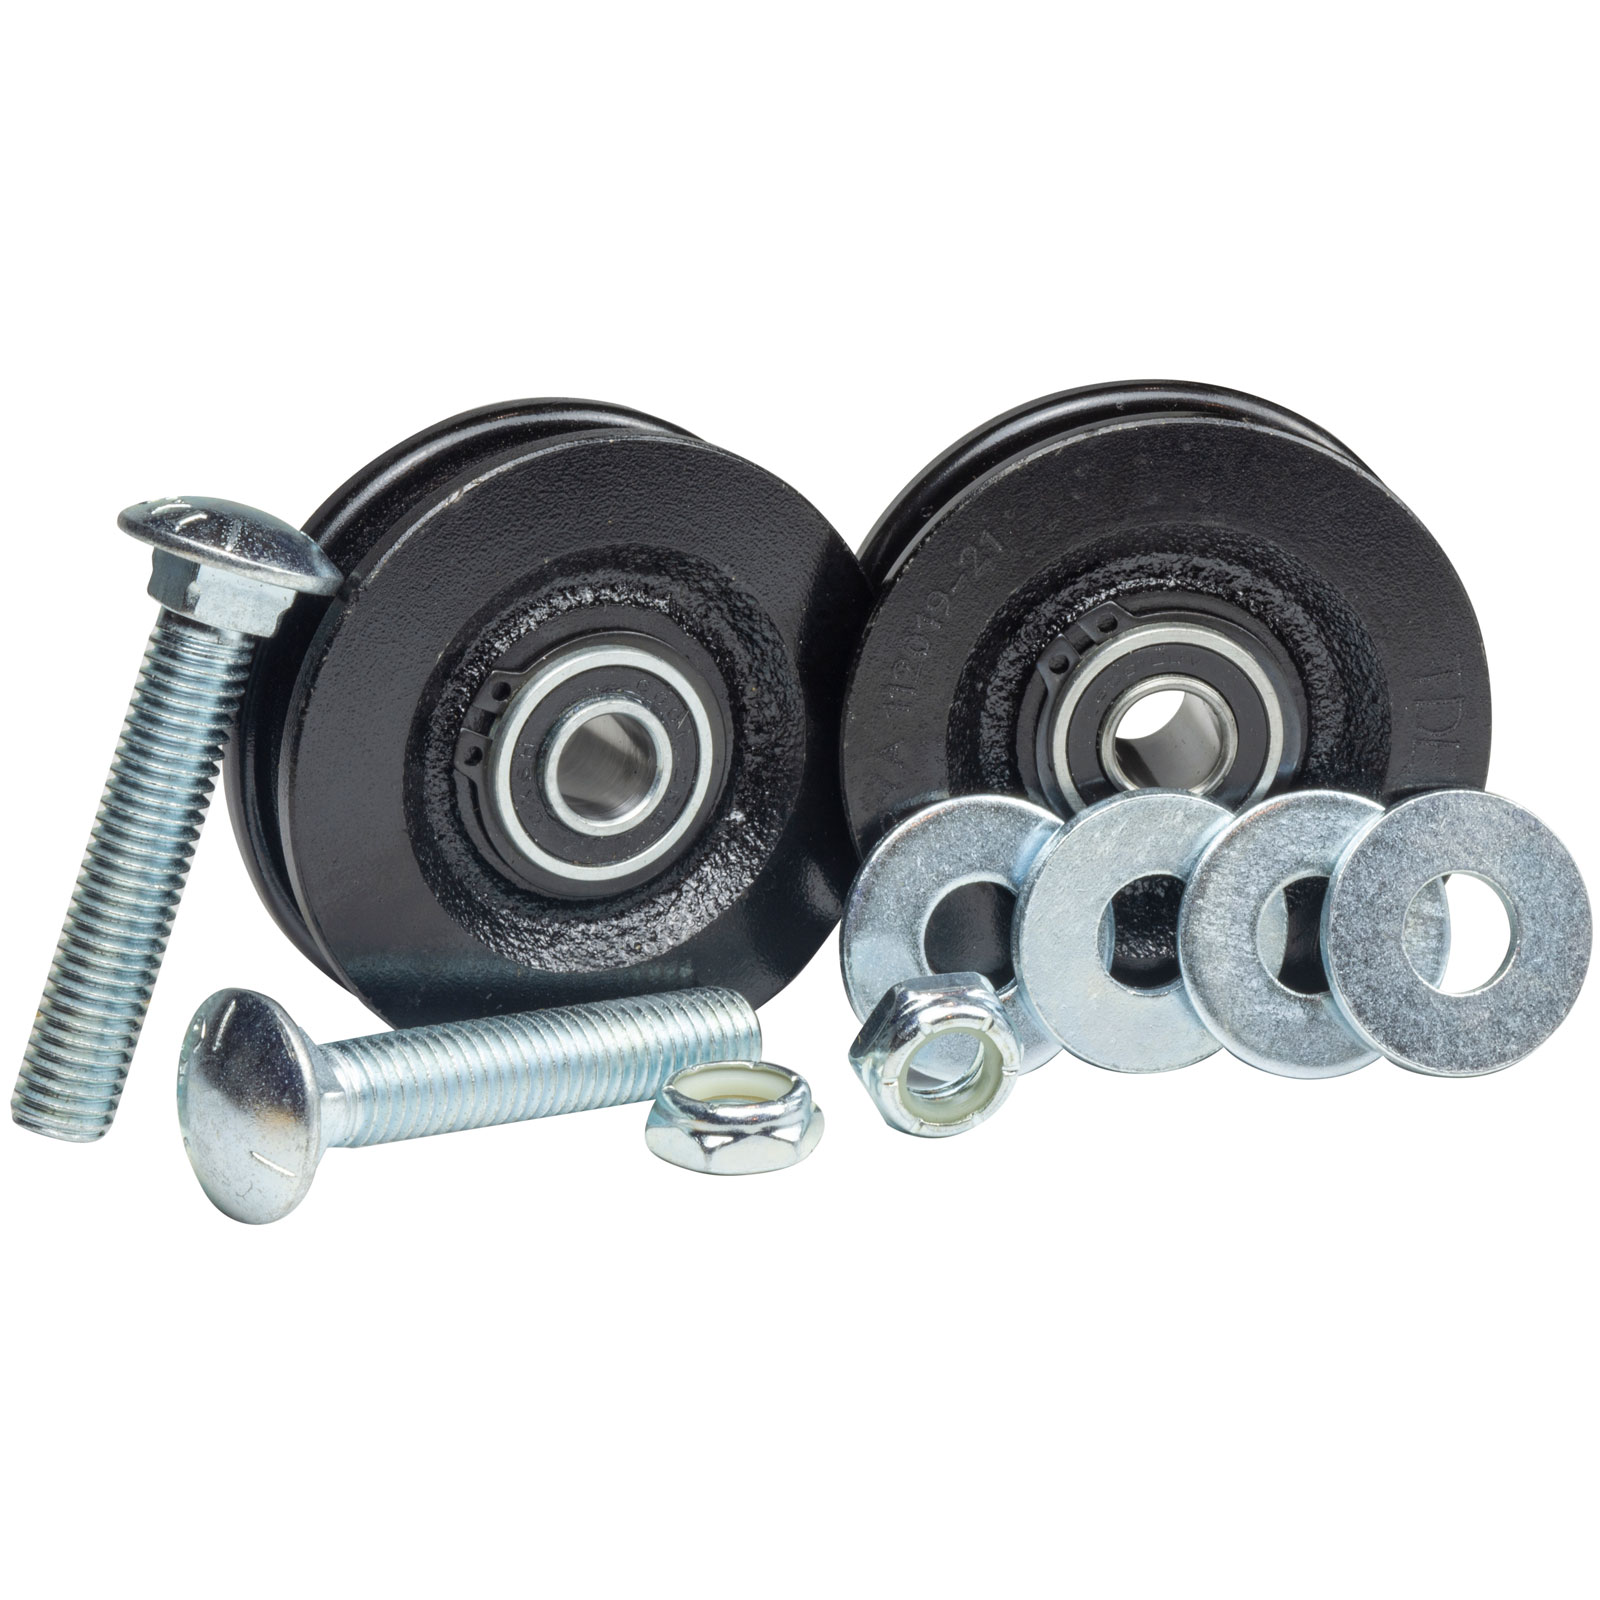 TP400 Complete Carriage Wheel Kit